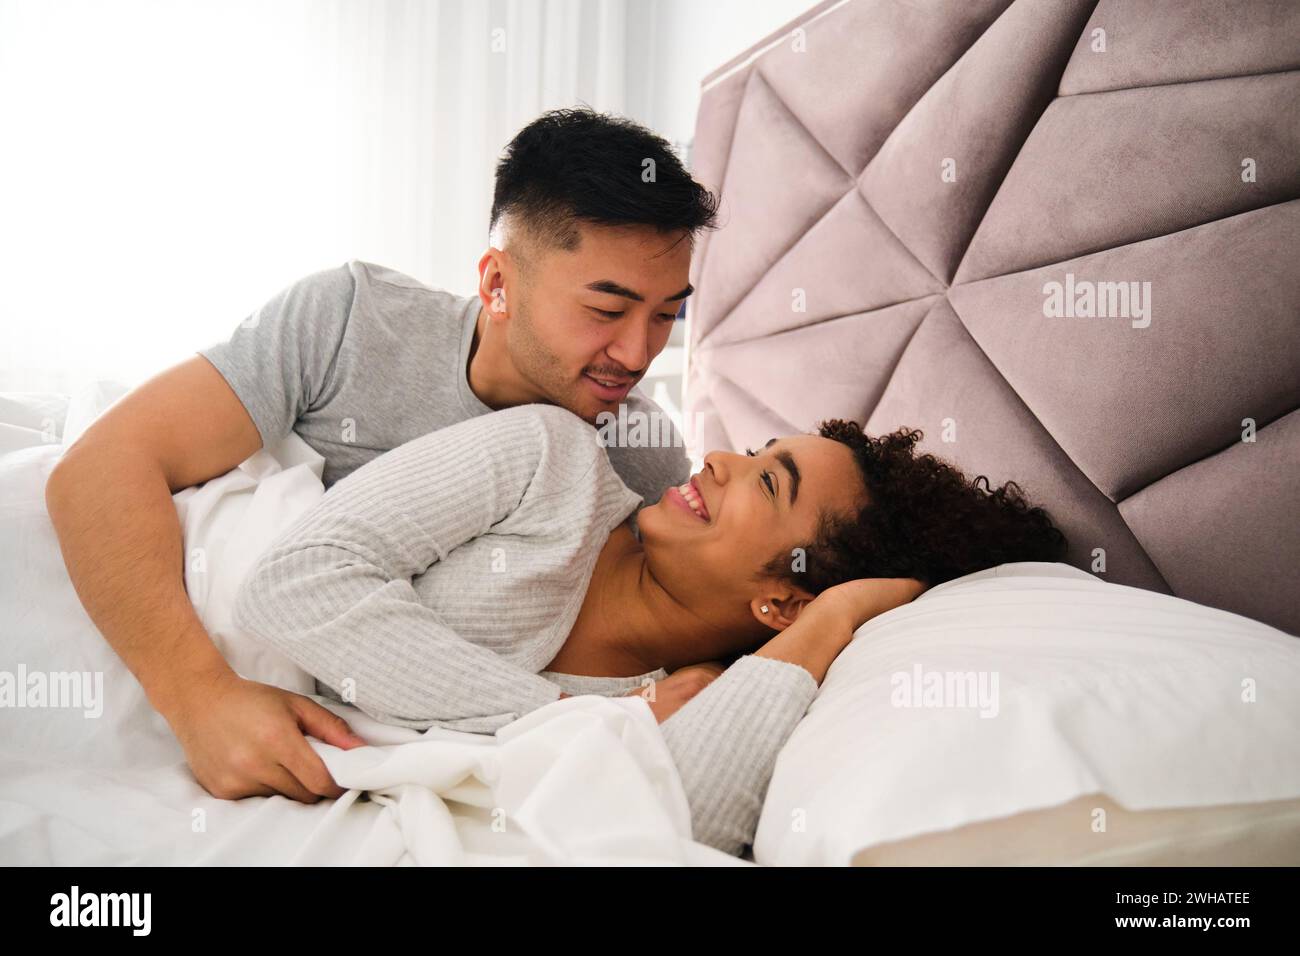 Multiracial romantic couple wake up together in bed during honeymoon. Stock Photo